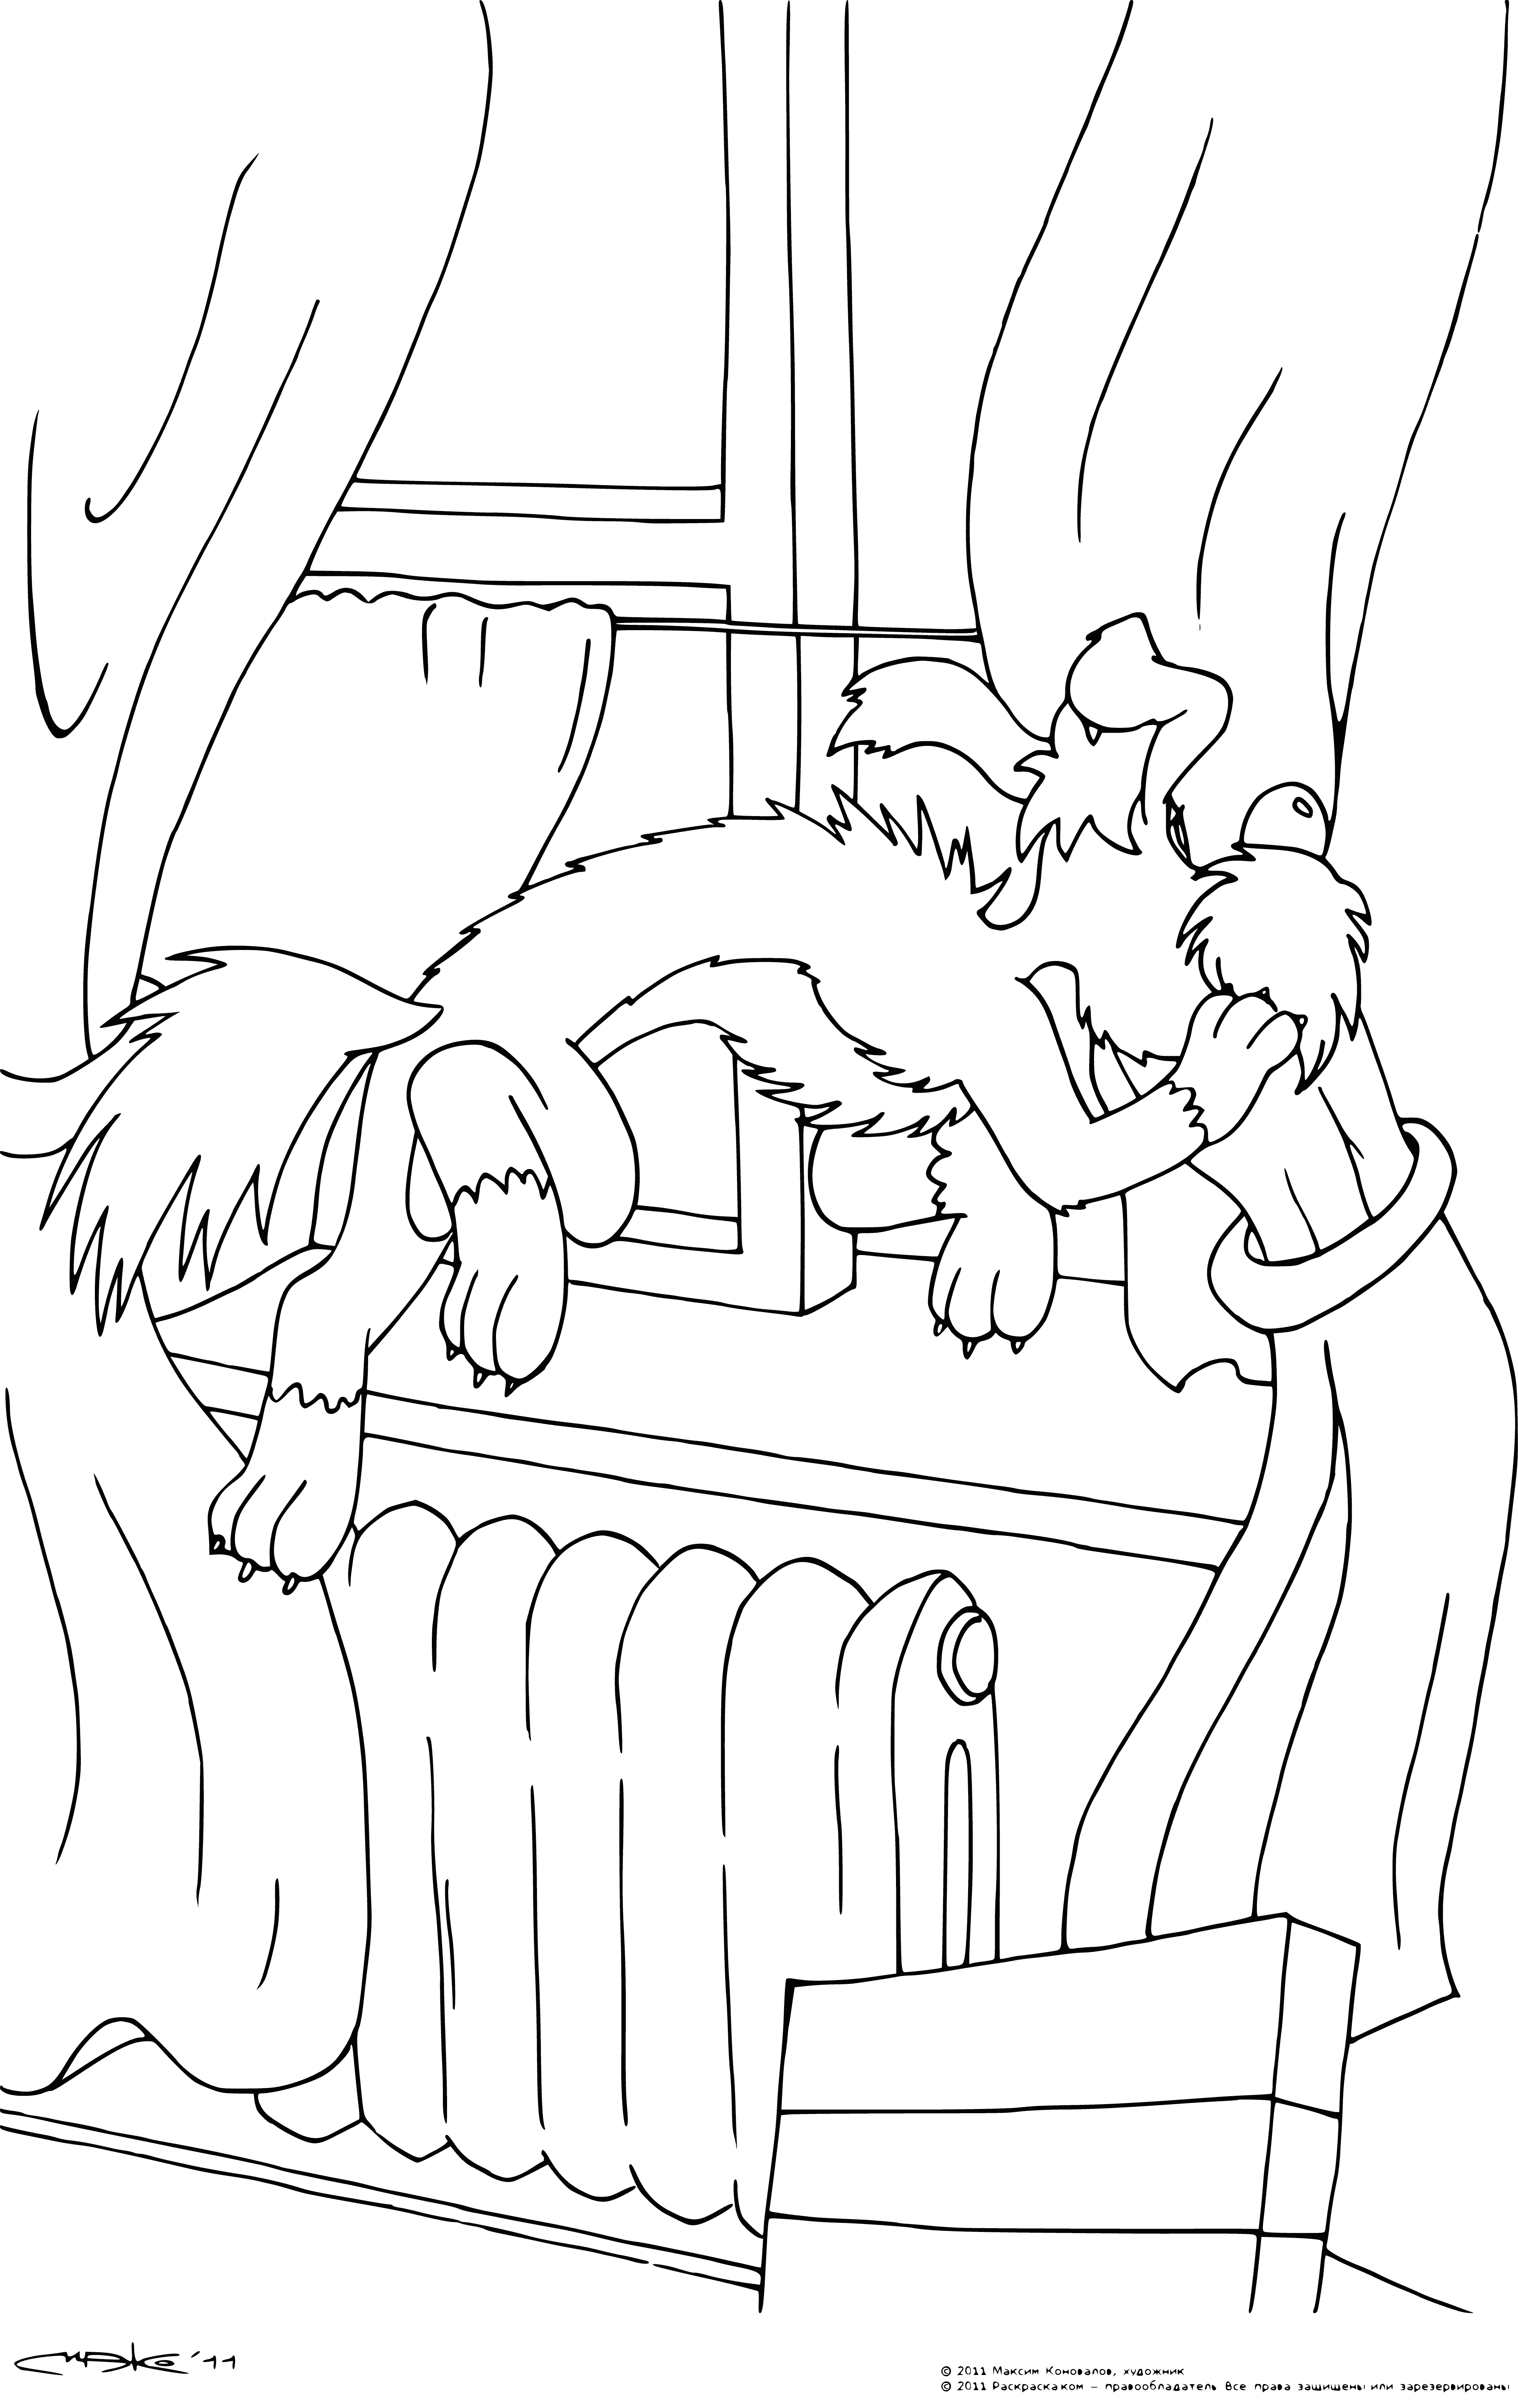 coloring page: Bobik visits Barbos, a 3-eyed dog, but quickly runs away in fear.